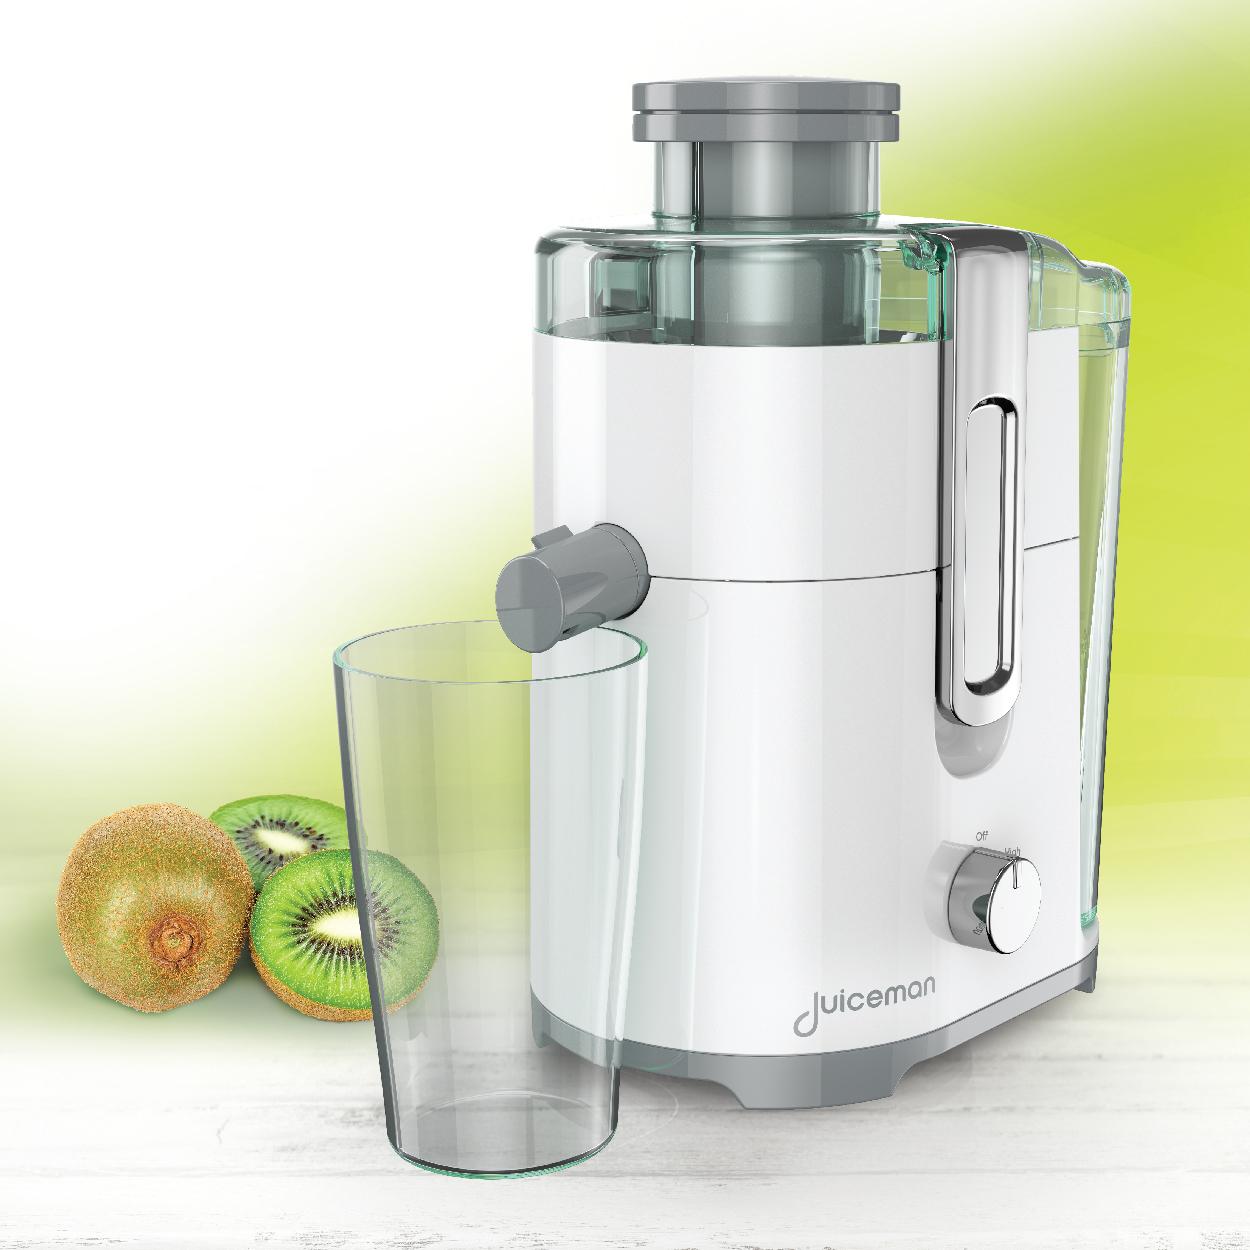 How To Juice Kiwi In A Juicer